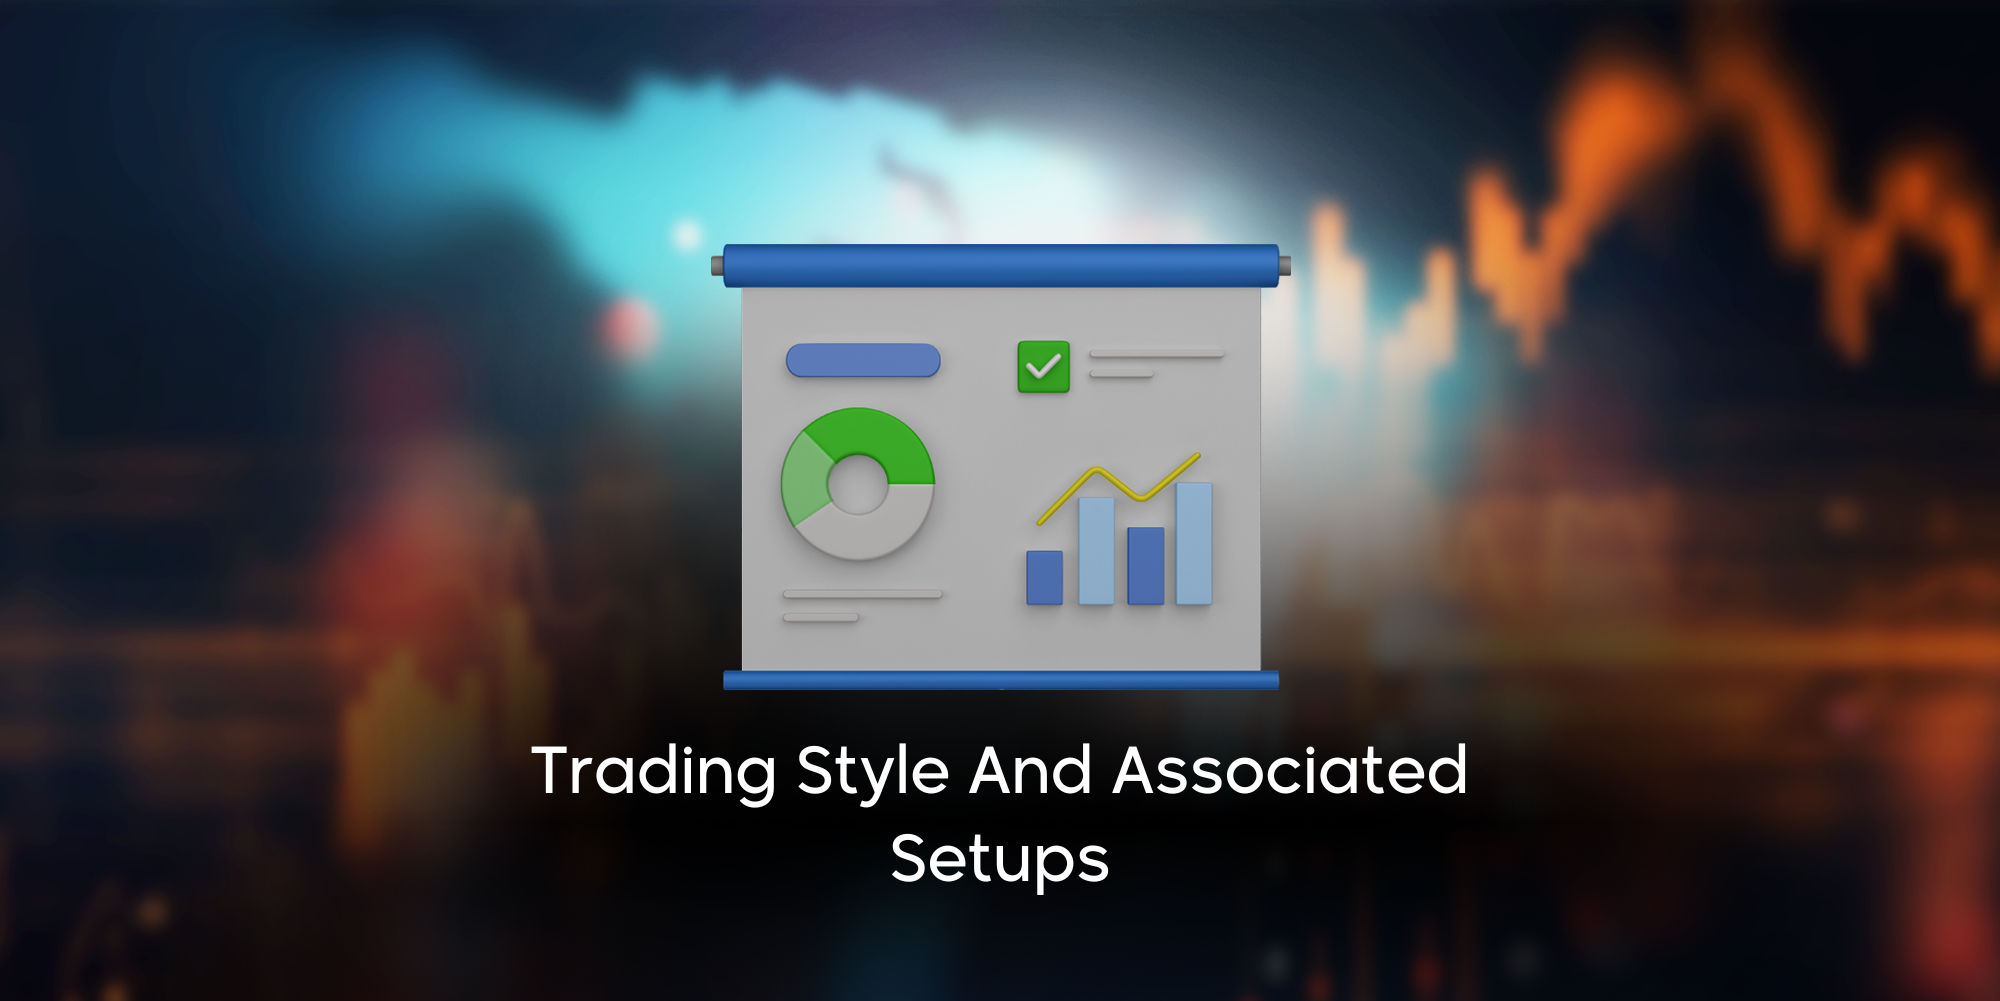 Trading Style and Associated Setups